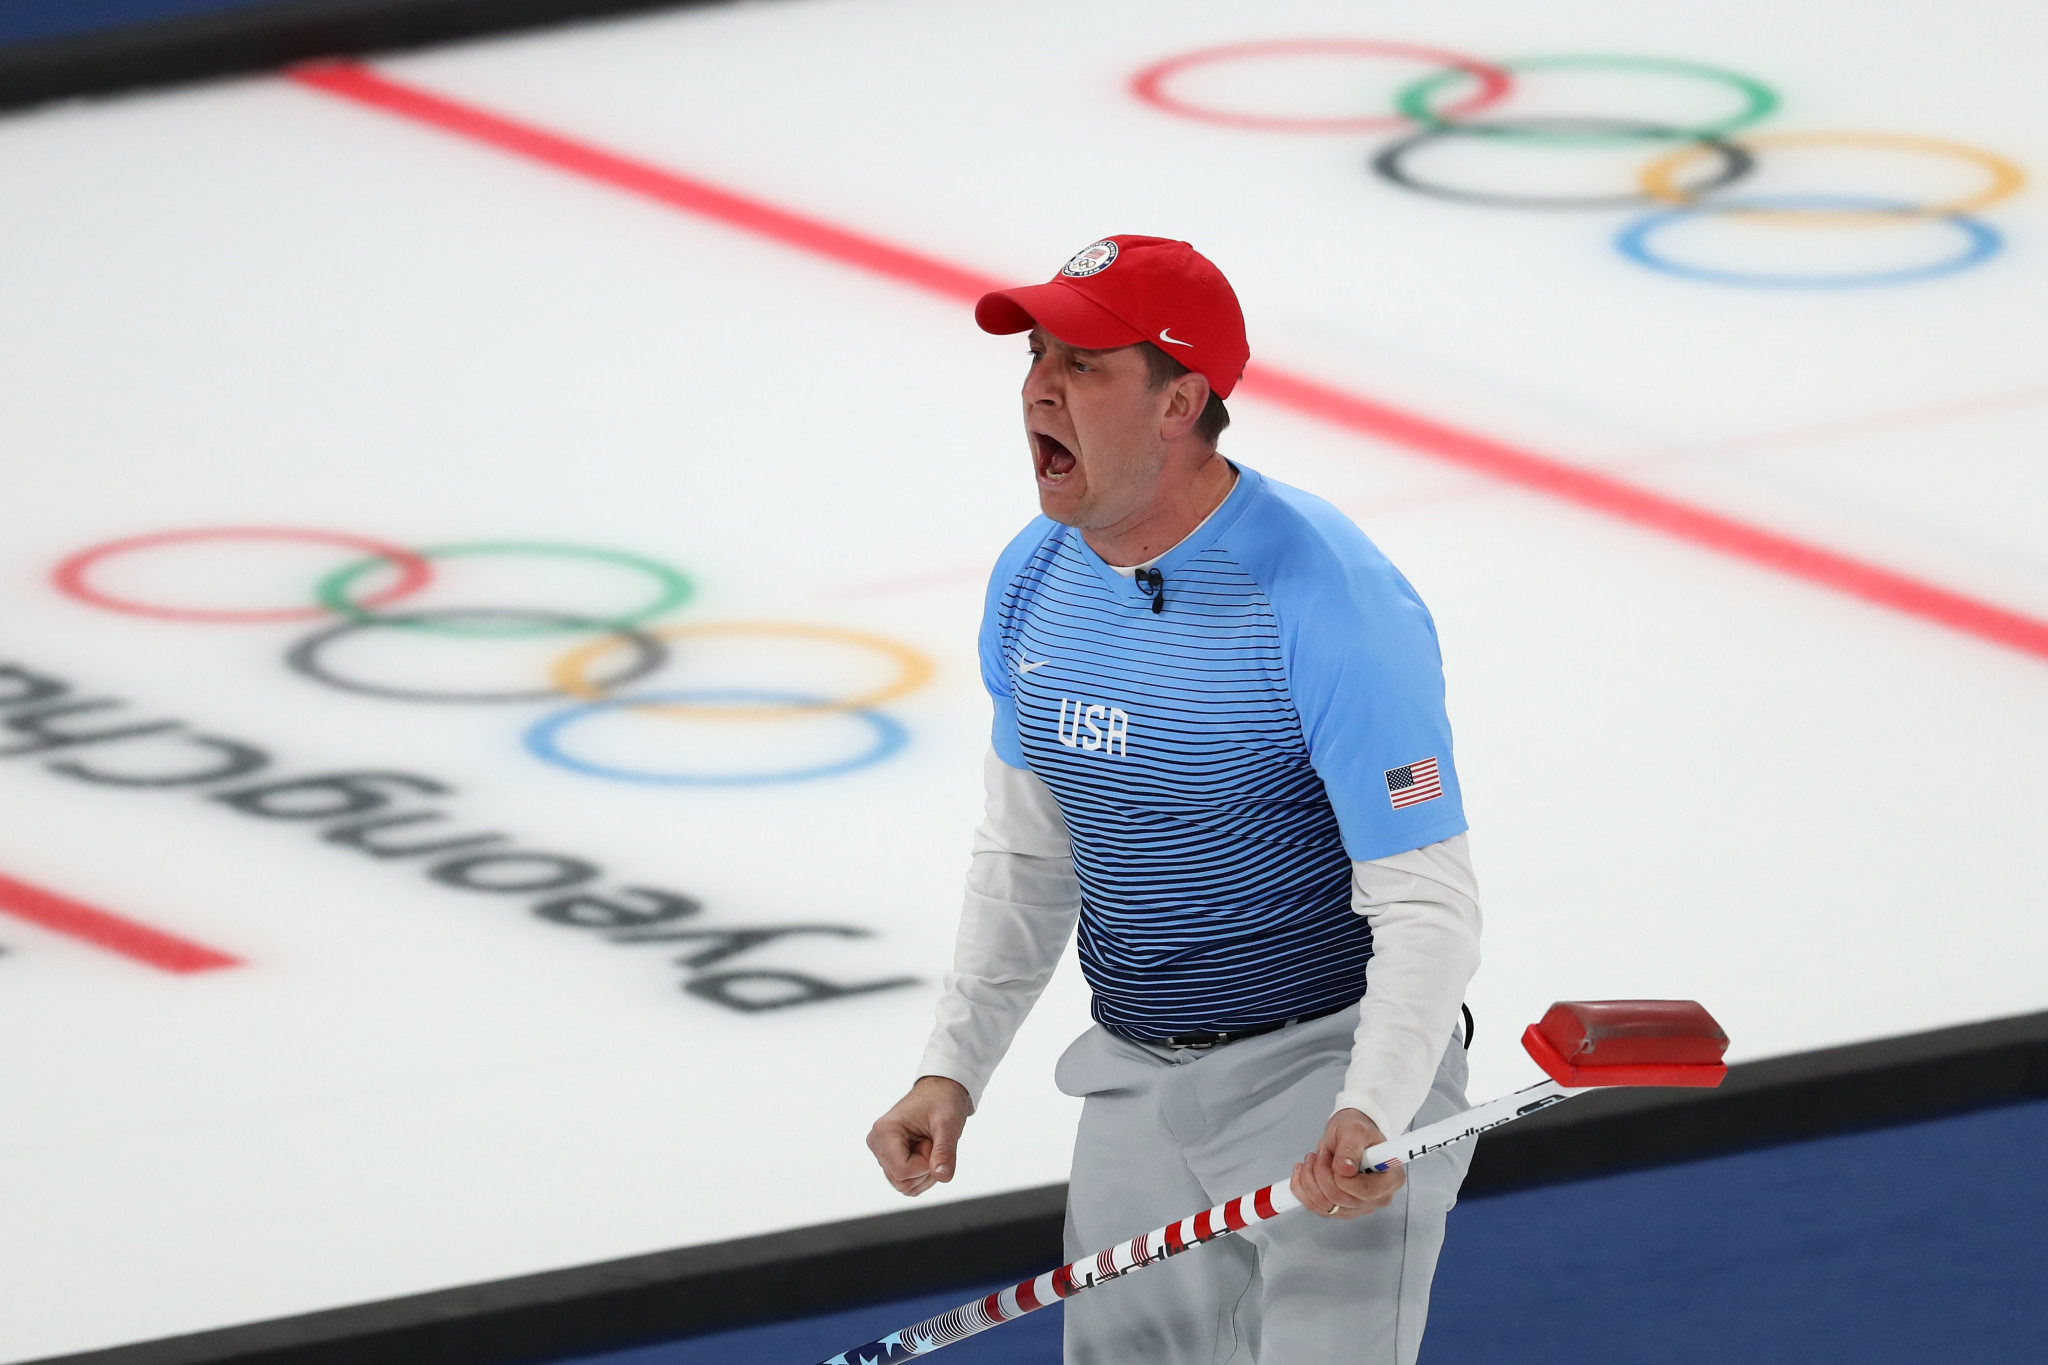 John Shuster skipped the US to a famous men's curling Olympic gold at Pyeongchang 2018 ©Getty Images